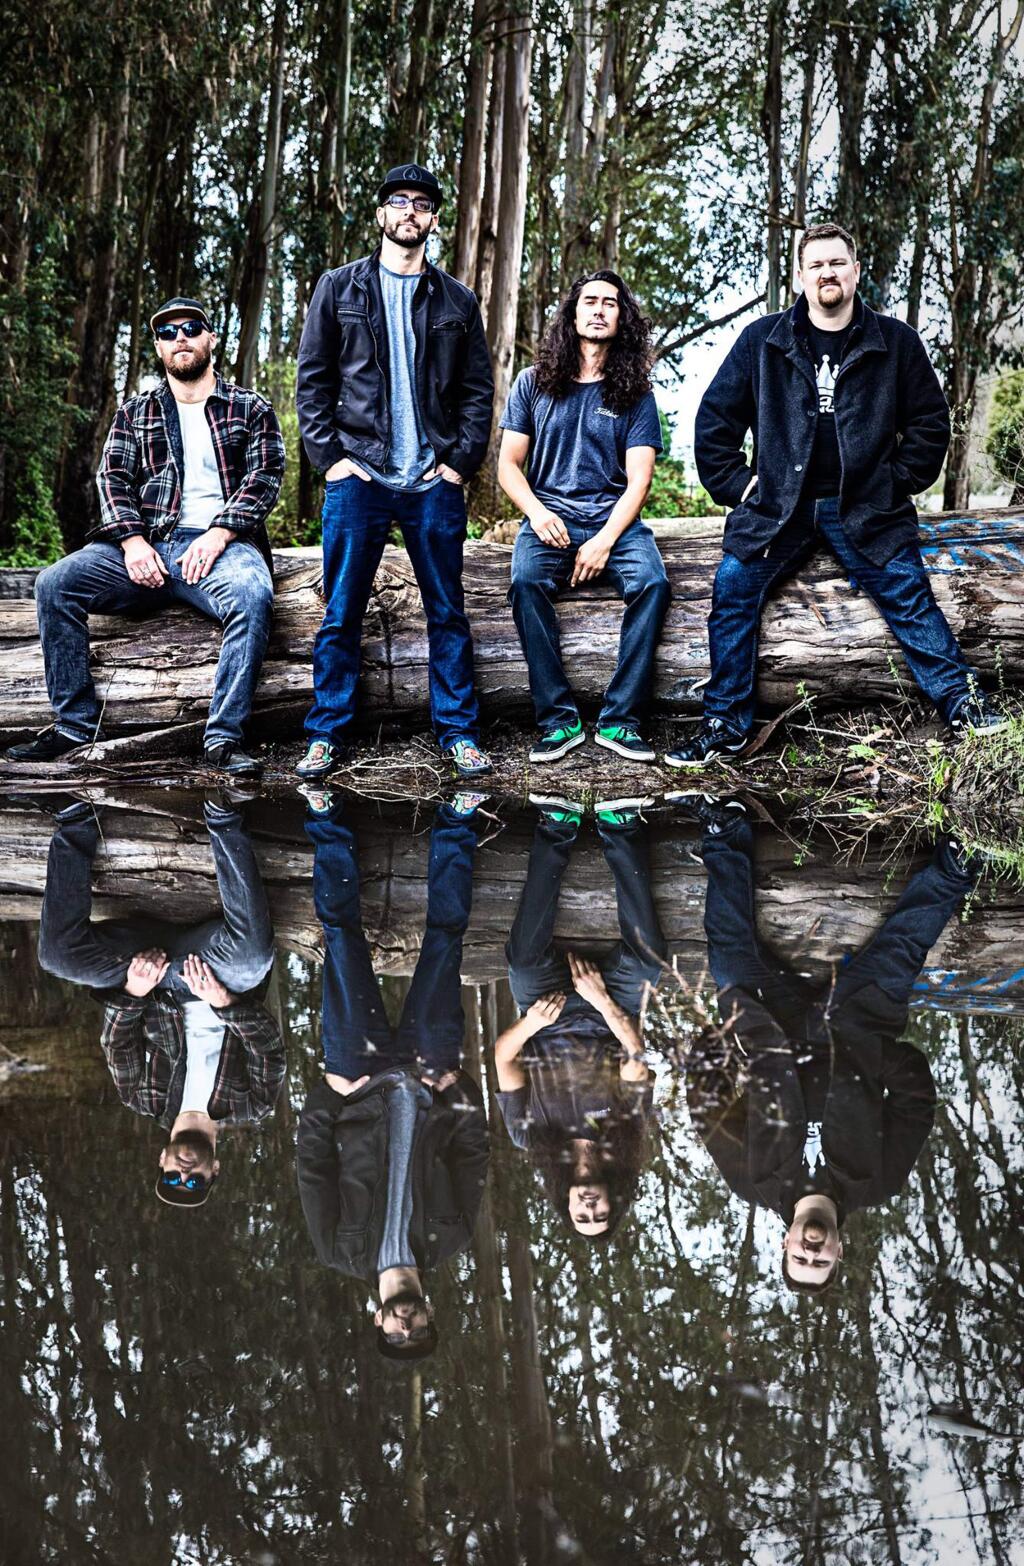 The Expendables, from Santa Cruz, consists of four longtime friends: Geoff Weers (Guitar and Vocals), Adam Patterson (Drums and Vocals), Raul Bianchi (Lead Guitar) and Ryan DeMars (Bass). (theexpendables.net)